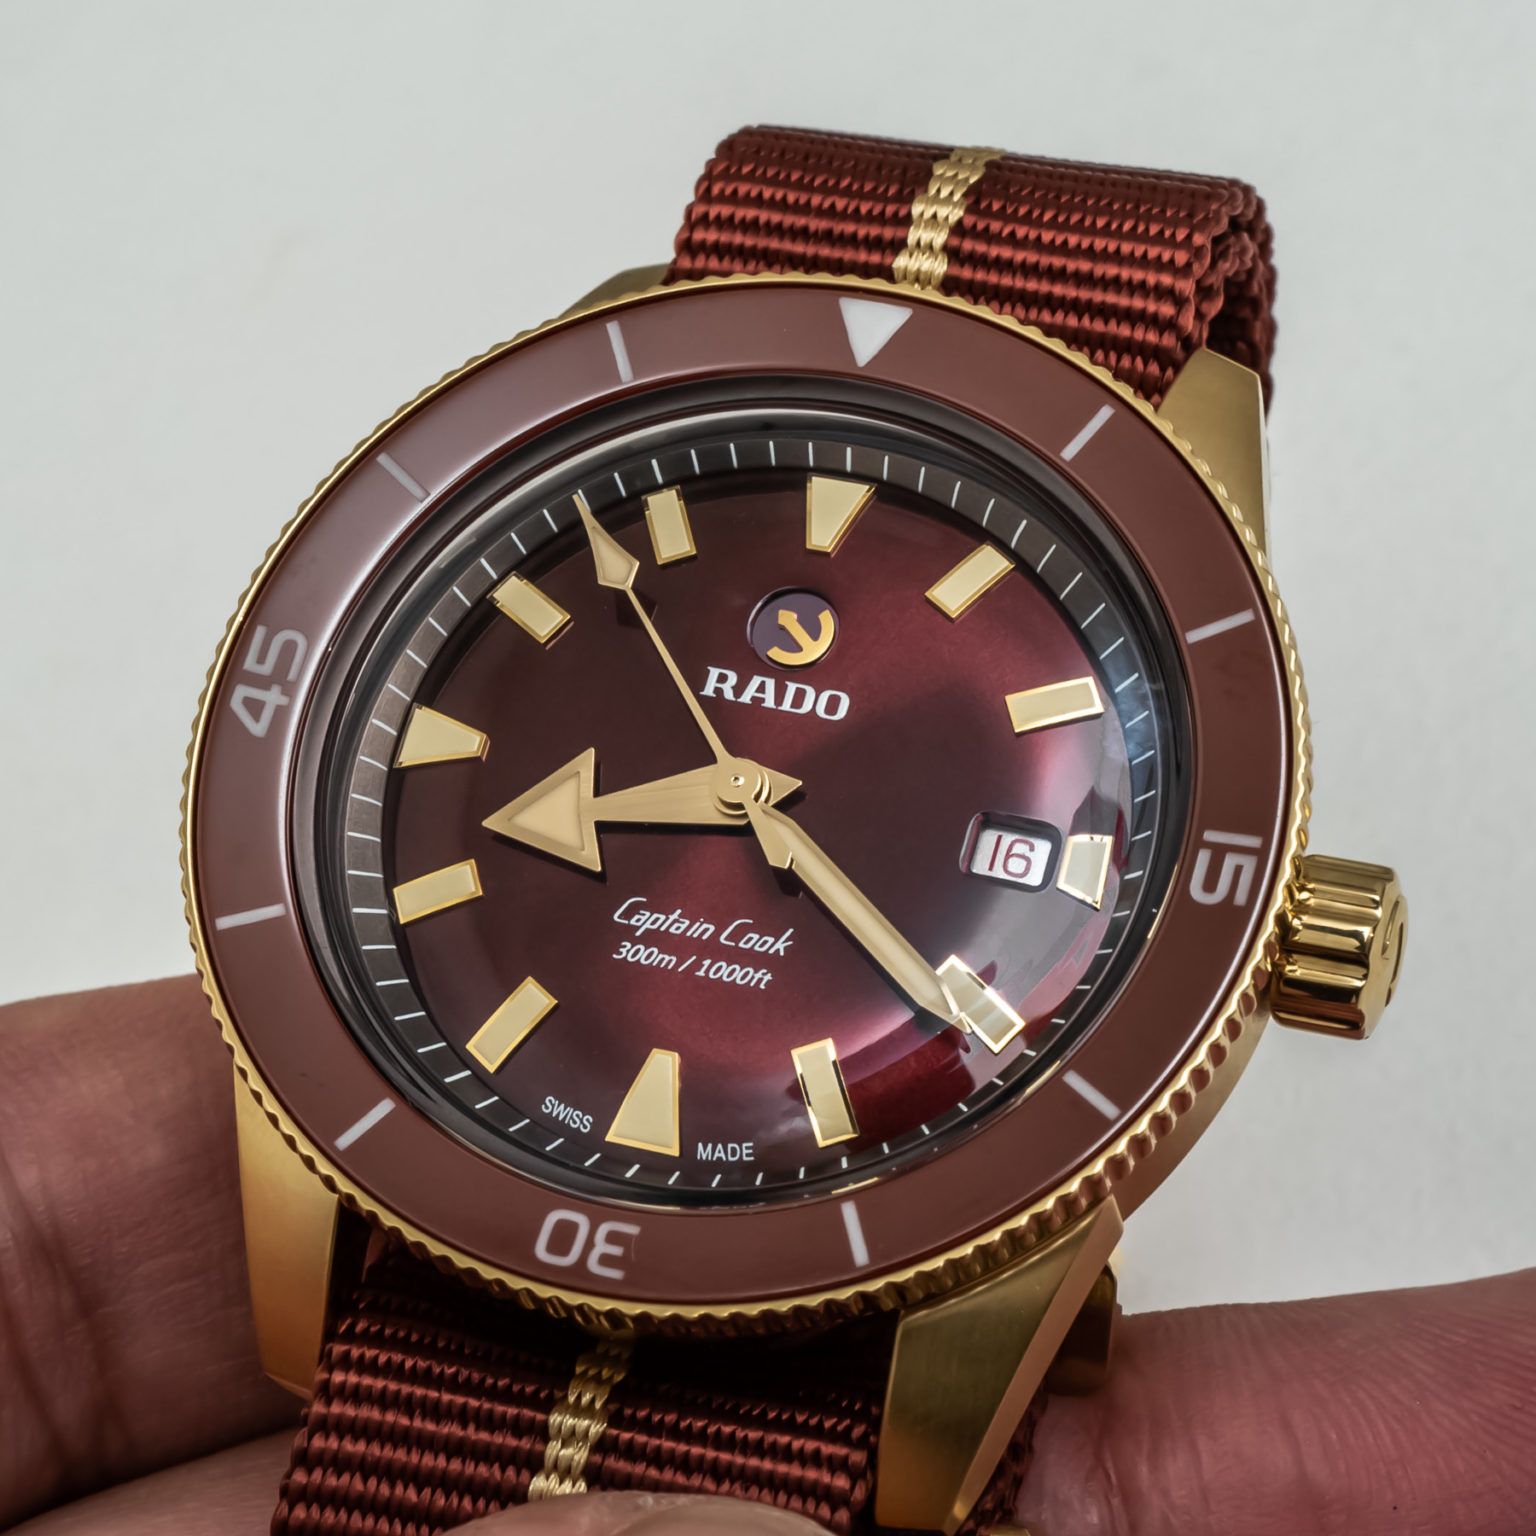 Rado Adds Extra Warmth To Bronze With The Captain Cook Bronze Burgundy ...